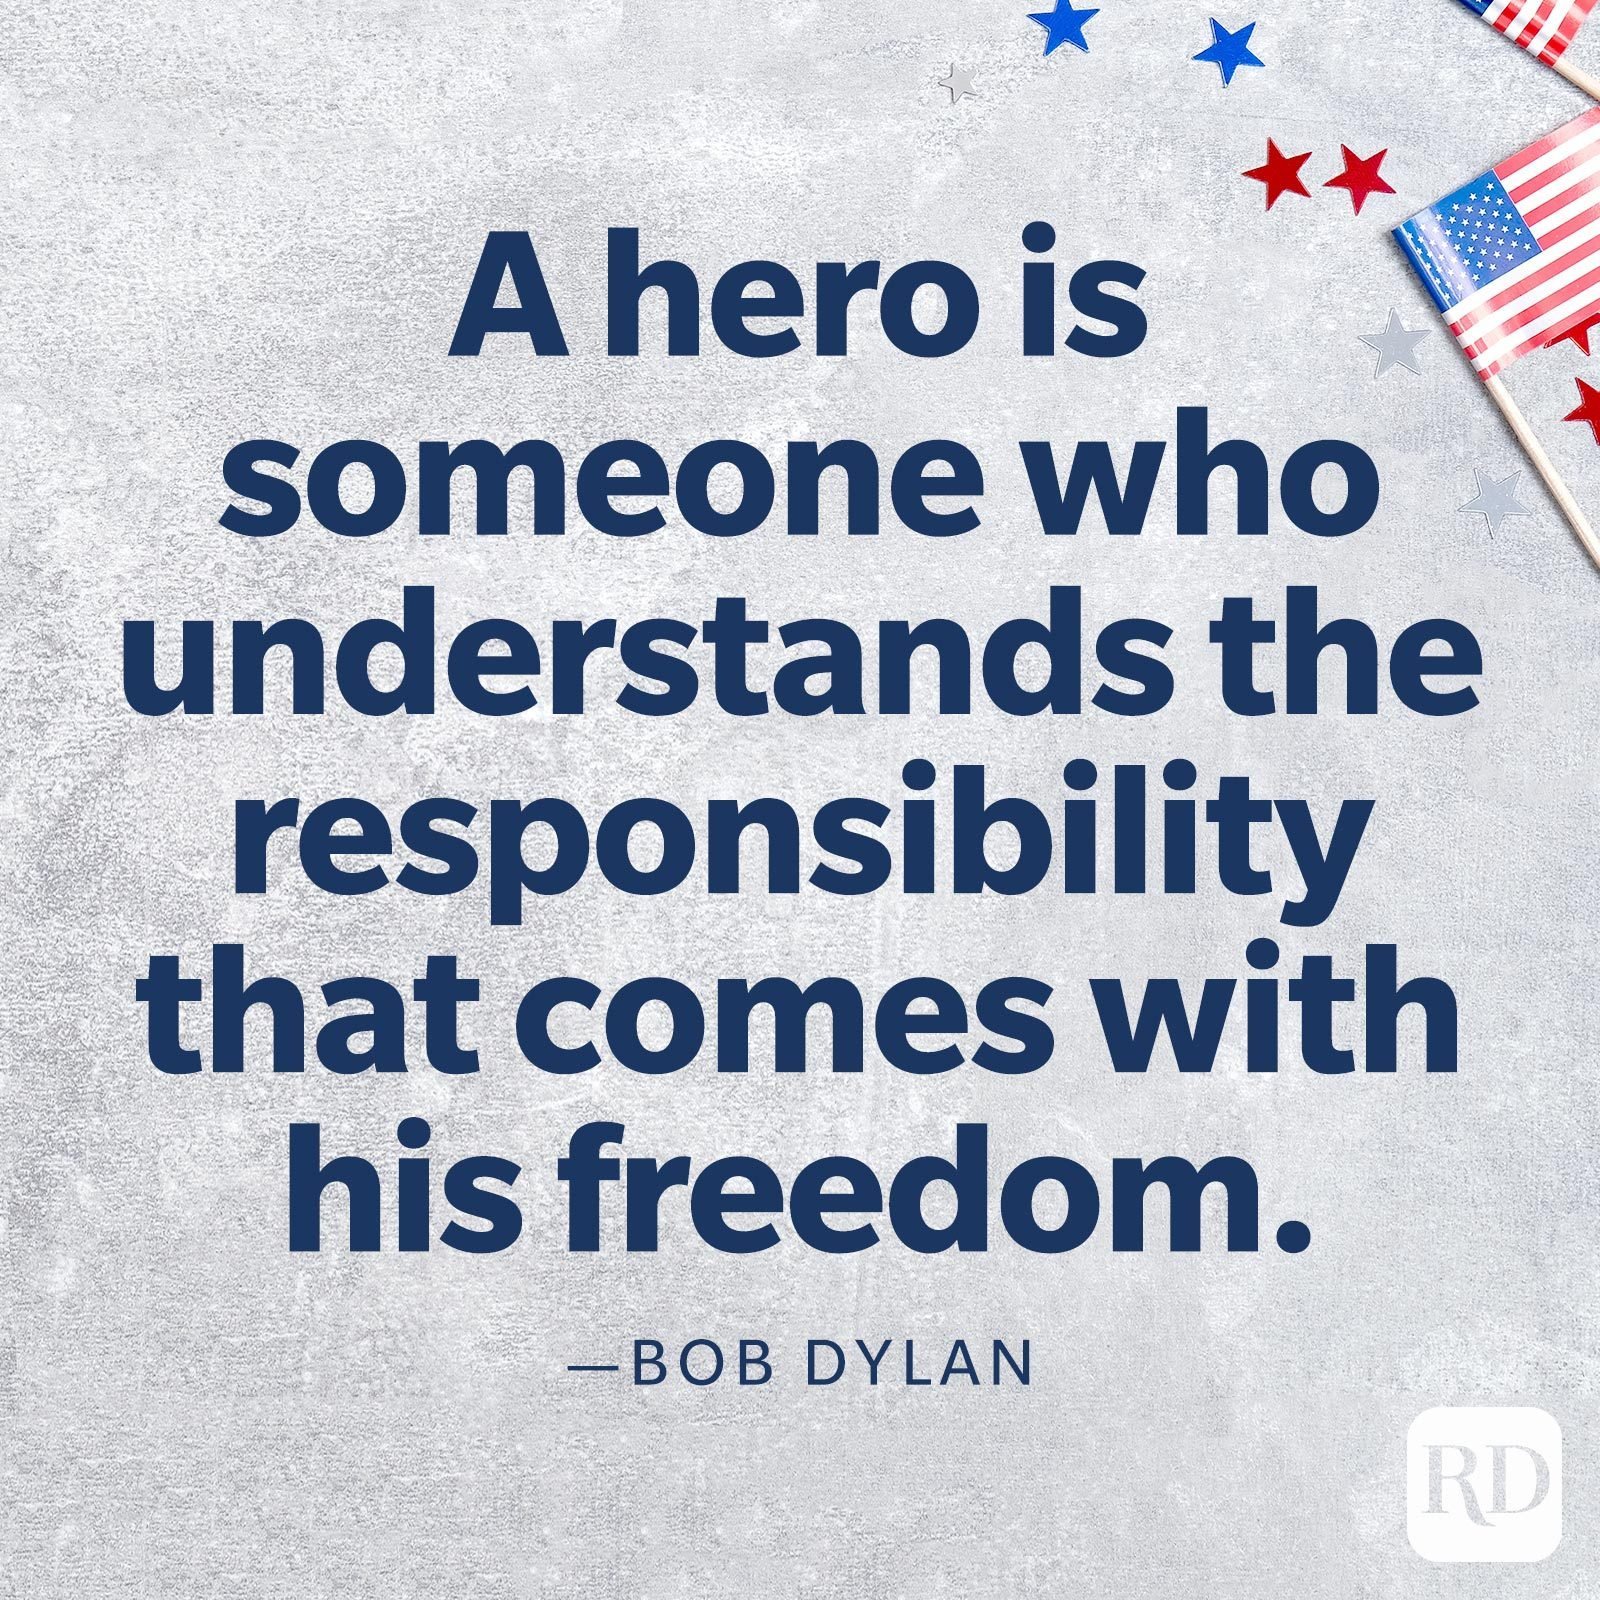 40 Memorial Day Quotes to Share in Honor and Remembrance